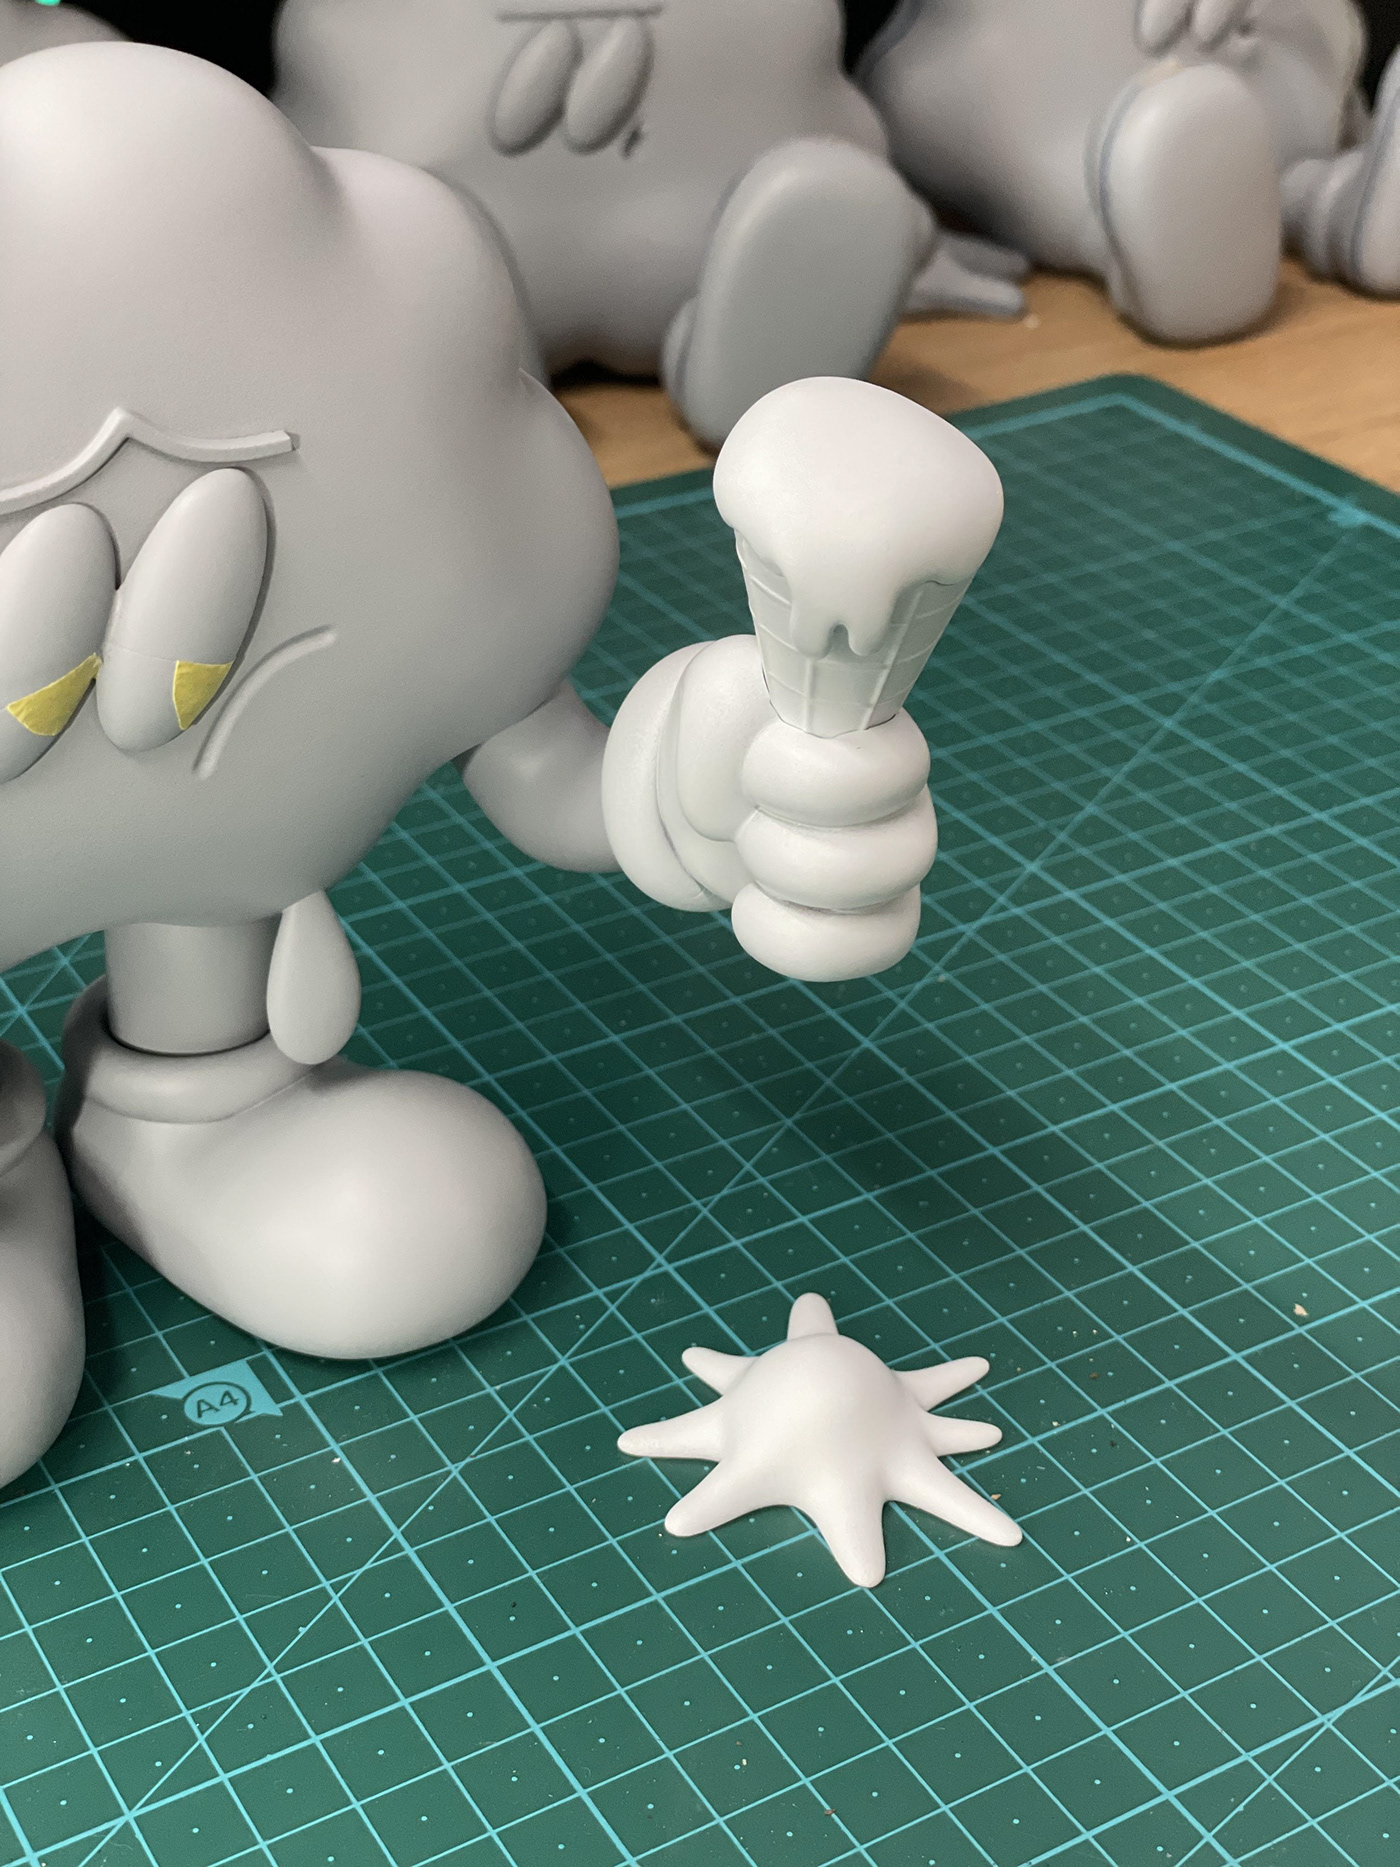 art toy arttoy designertoy resintoy Collection 3dmodeling rendering clouds emotion Character ice cream artworks